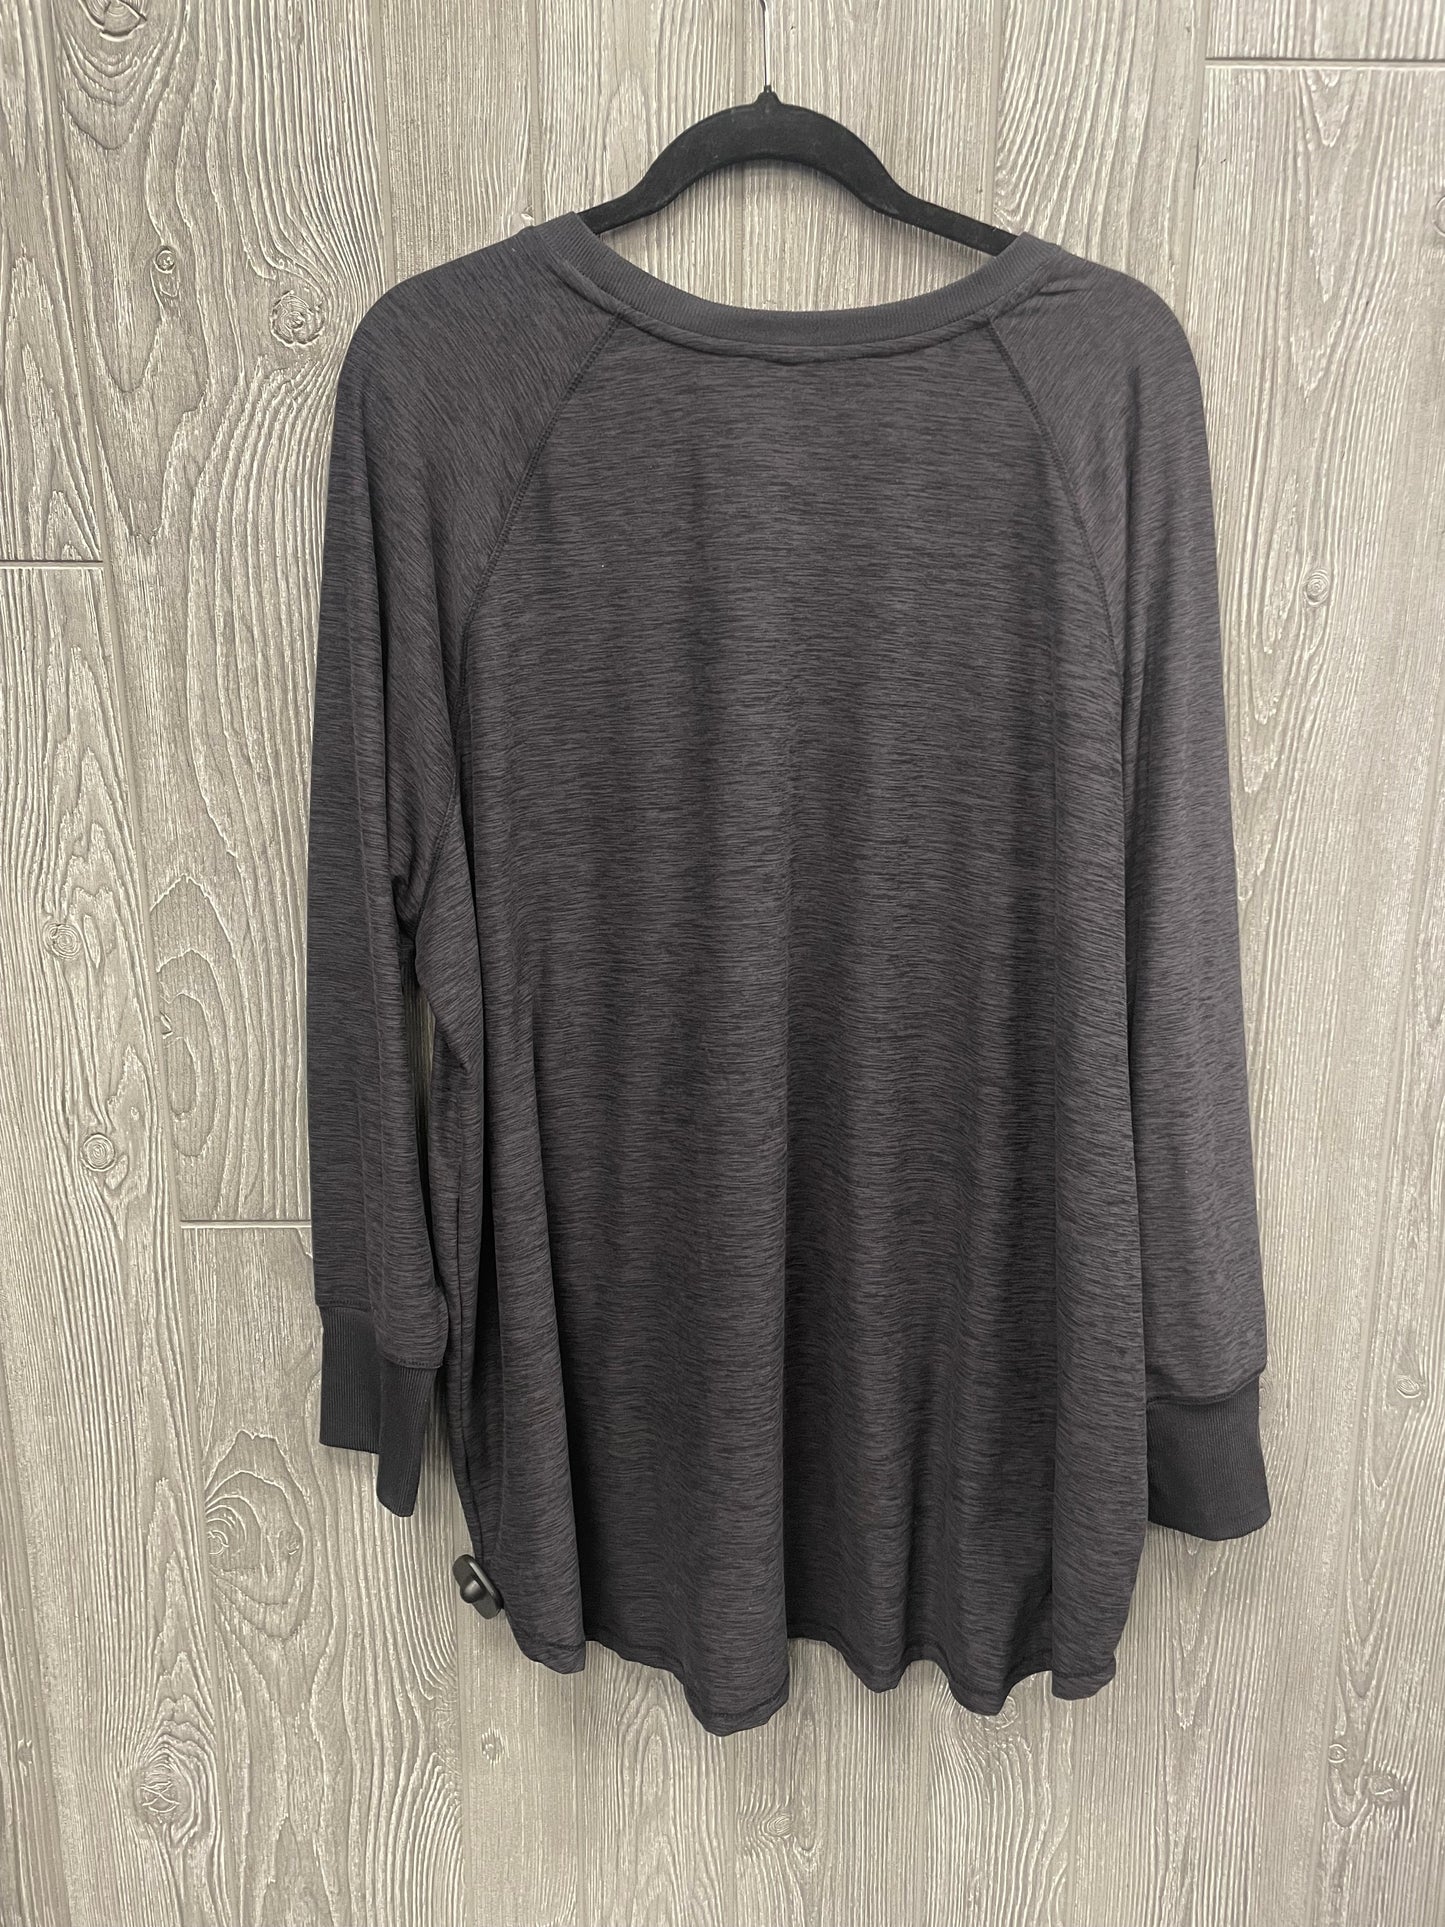 Athletic Top Long Sleeve Crewneck By Clothes Mentor  Size: 3x